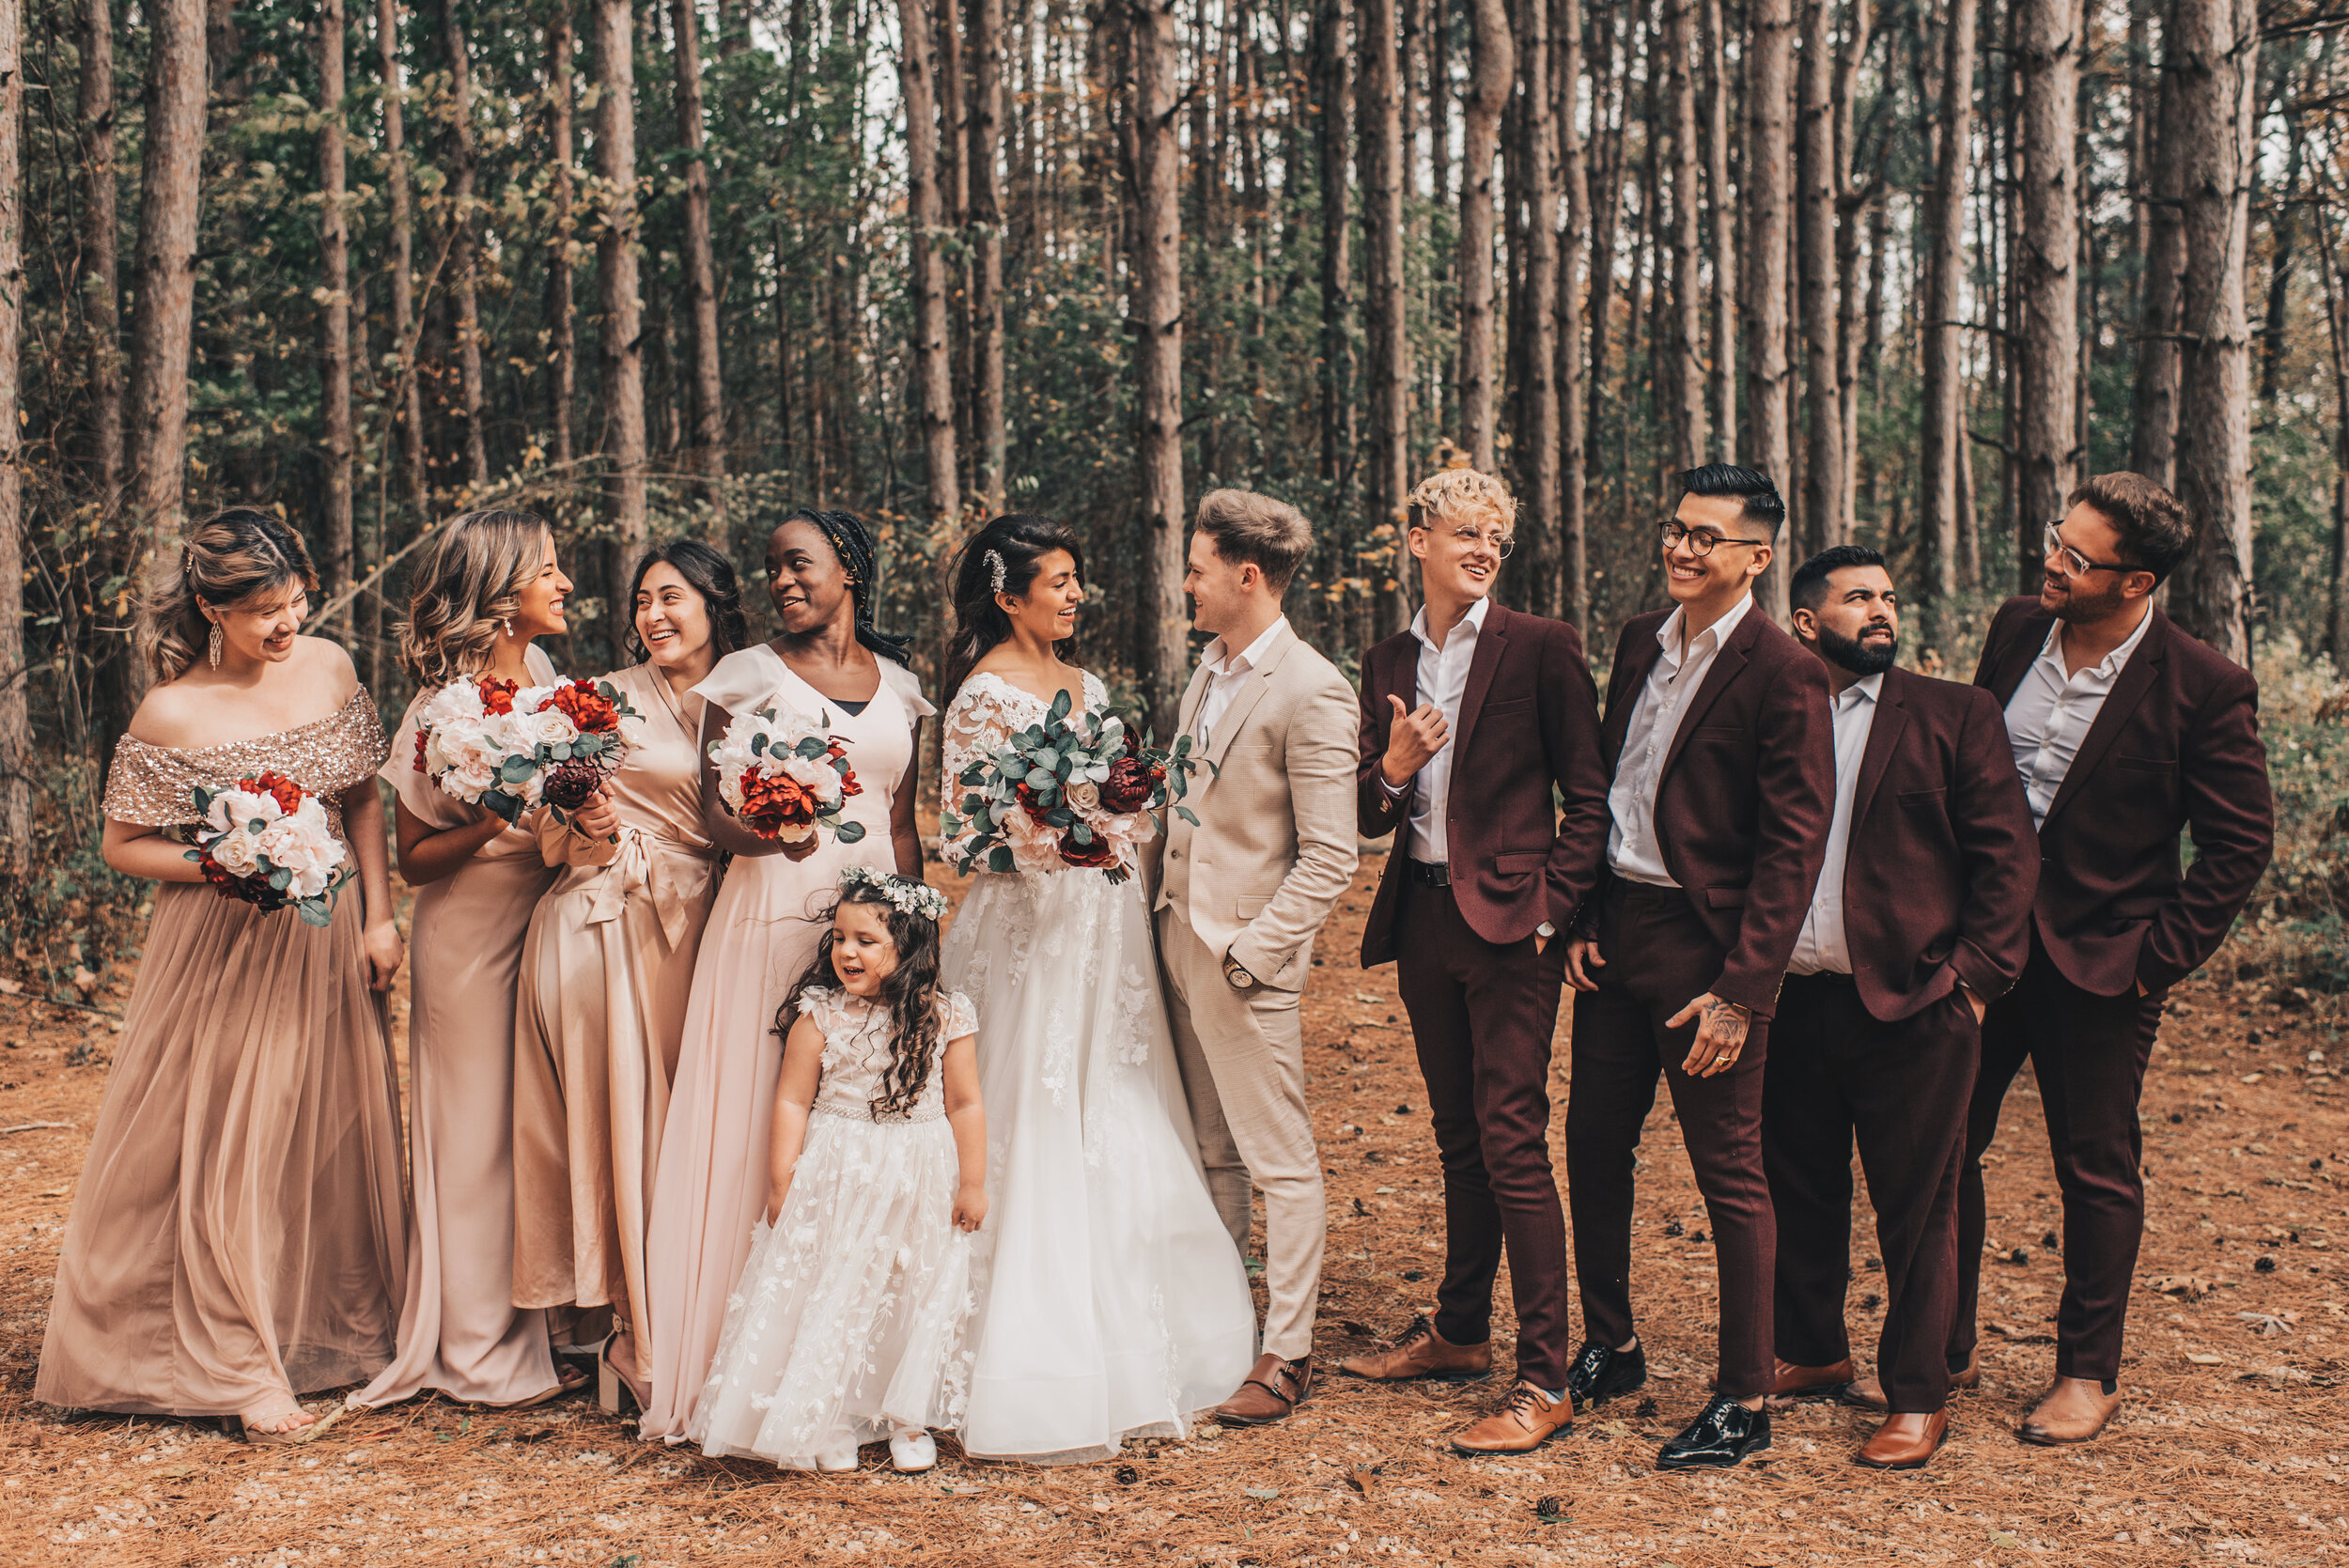 Wisconsin Wedding, Midwest Airbnb Wedding, Adventurous Airbnb Wedding, Outdoor Fall Modern Rustic Wedding, Wisconsin Photographer, Wisconsin Wedding Venue, Forest Pine Trees Bridal Party Photos